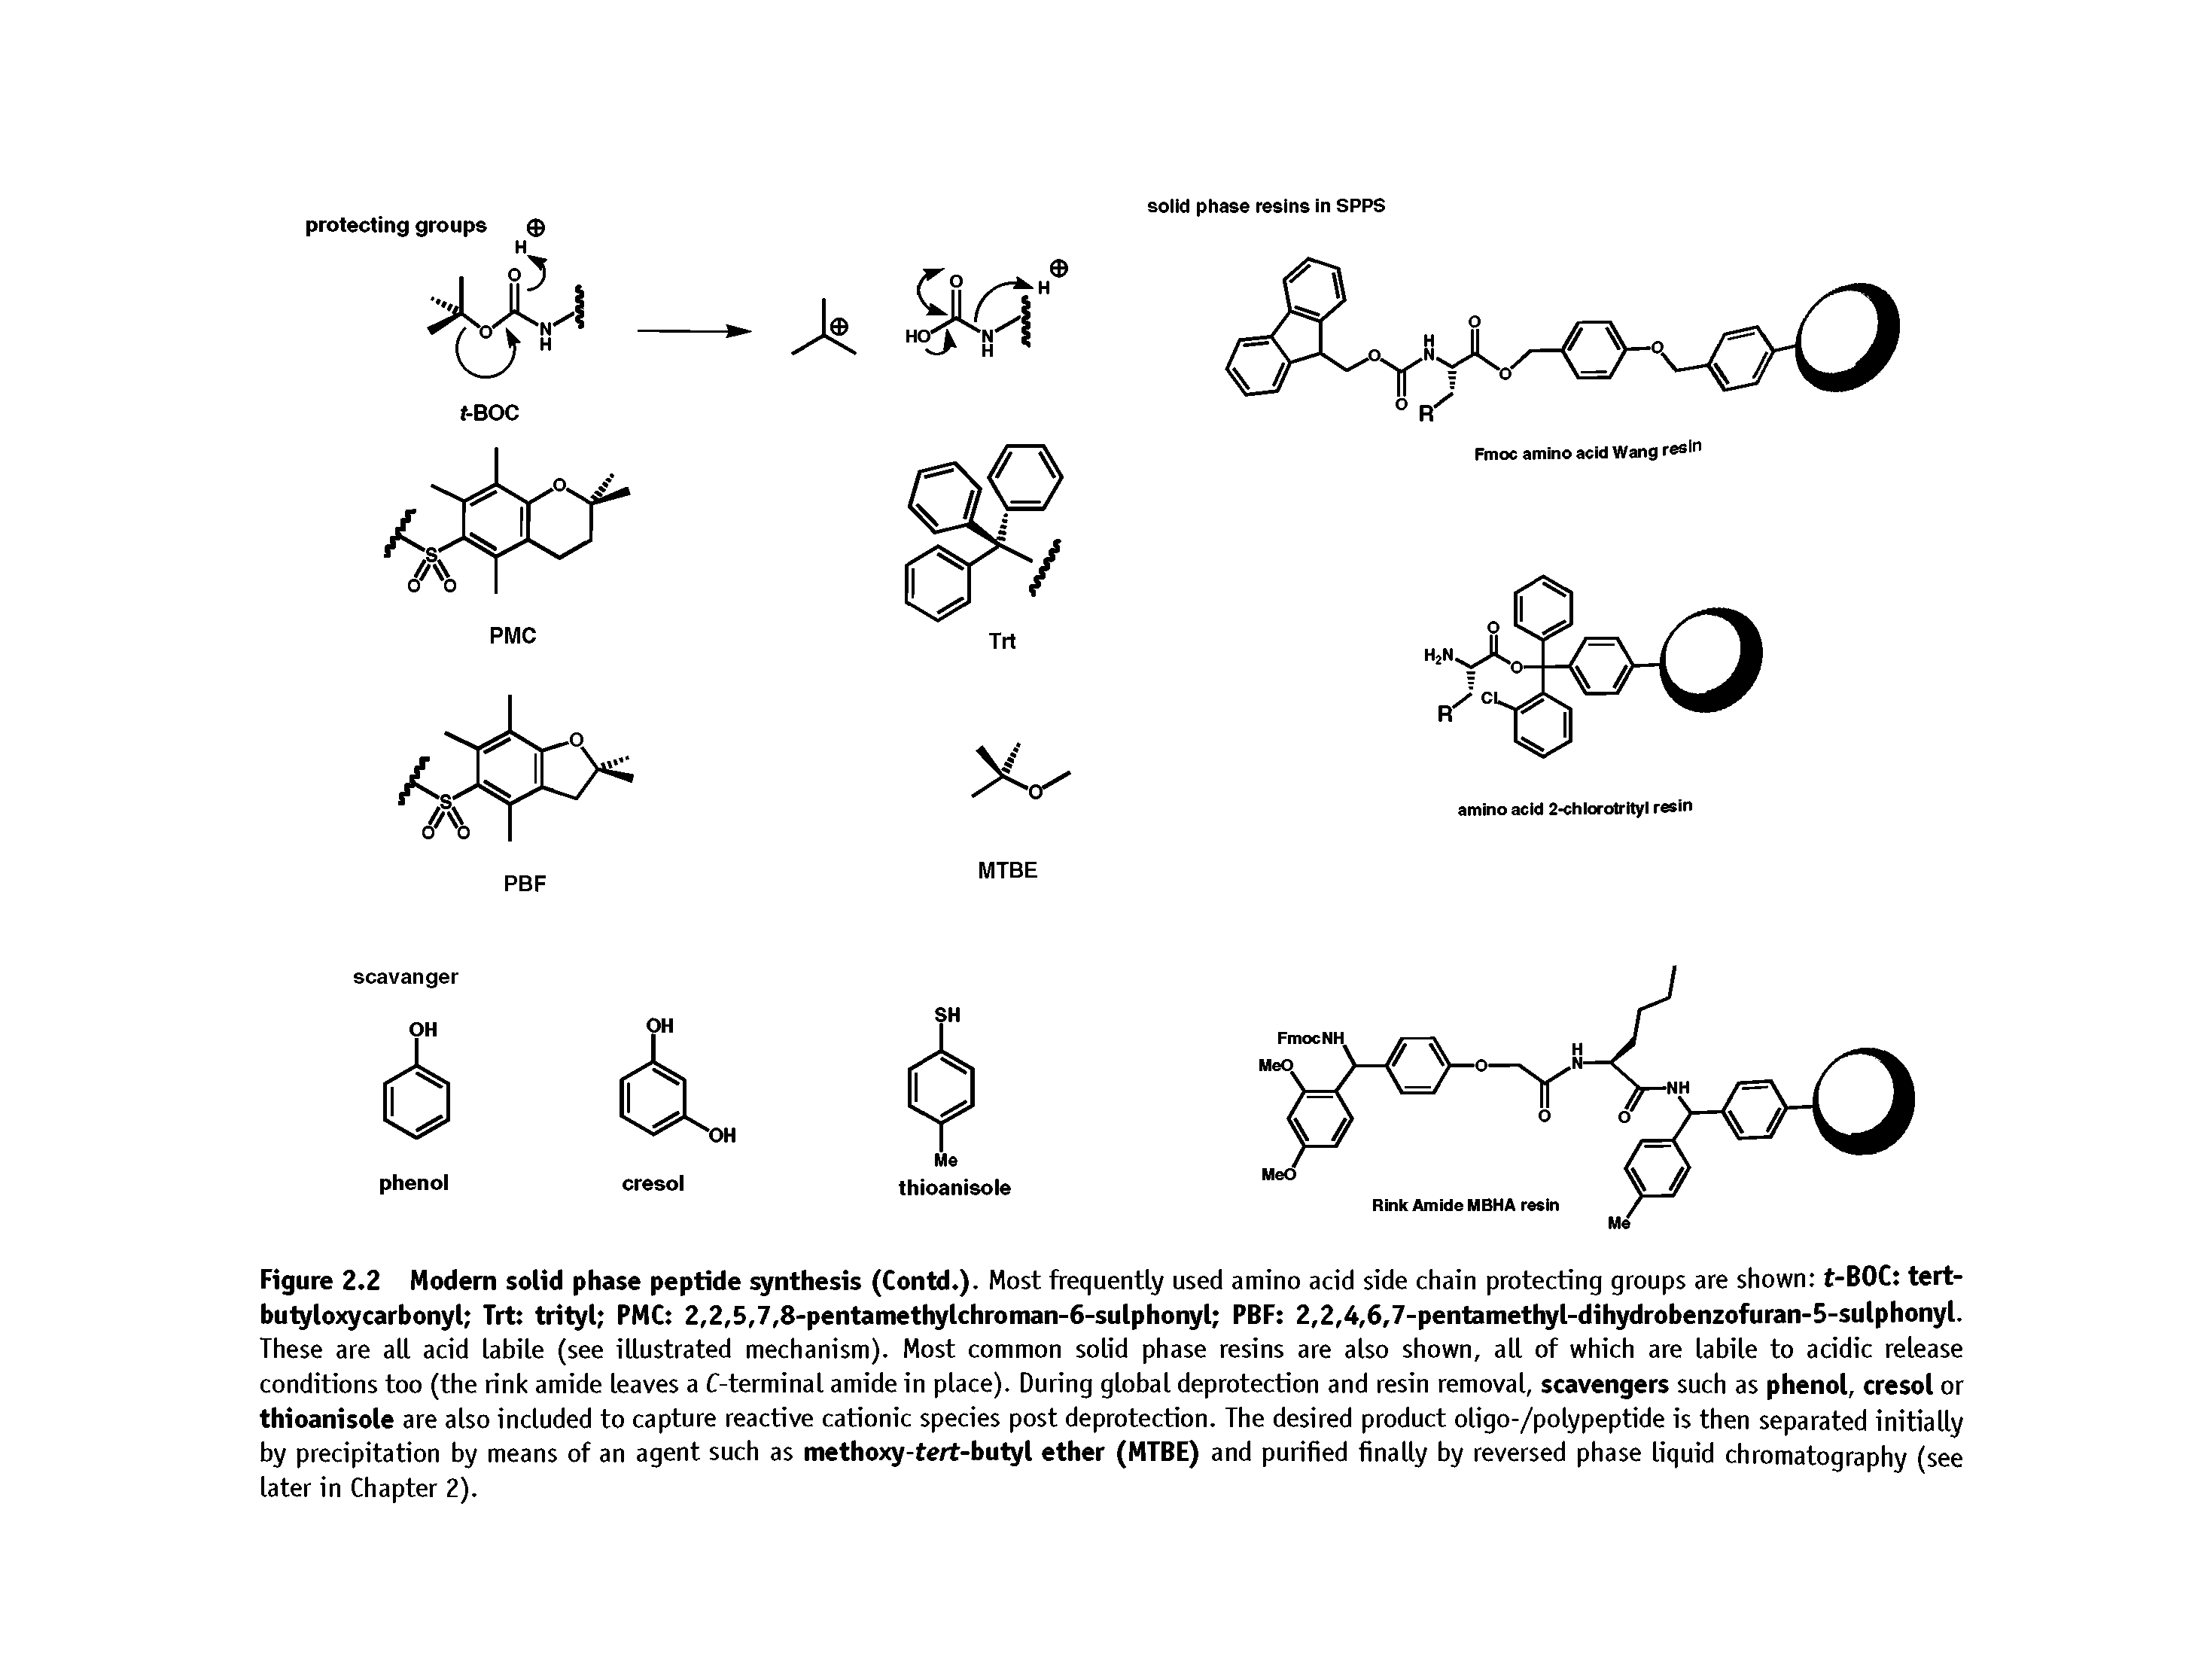 Figure 2.2 Modem solid phase peptide synthesis (Contd.). Most frequently used amino add side chain protecting groups are shown t-BOC tert-bulyloxycarbonyl Trt trityl PMC 2,2,5,7,8-pentamethylchroman-6-sulphonyl PBF 2,2,4,6,7-pentamethyl-dihydrobenzofuran-5-sulphonyl.